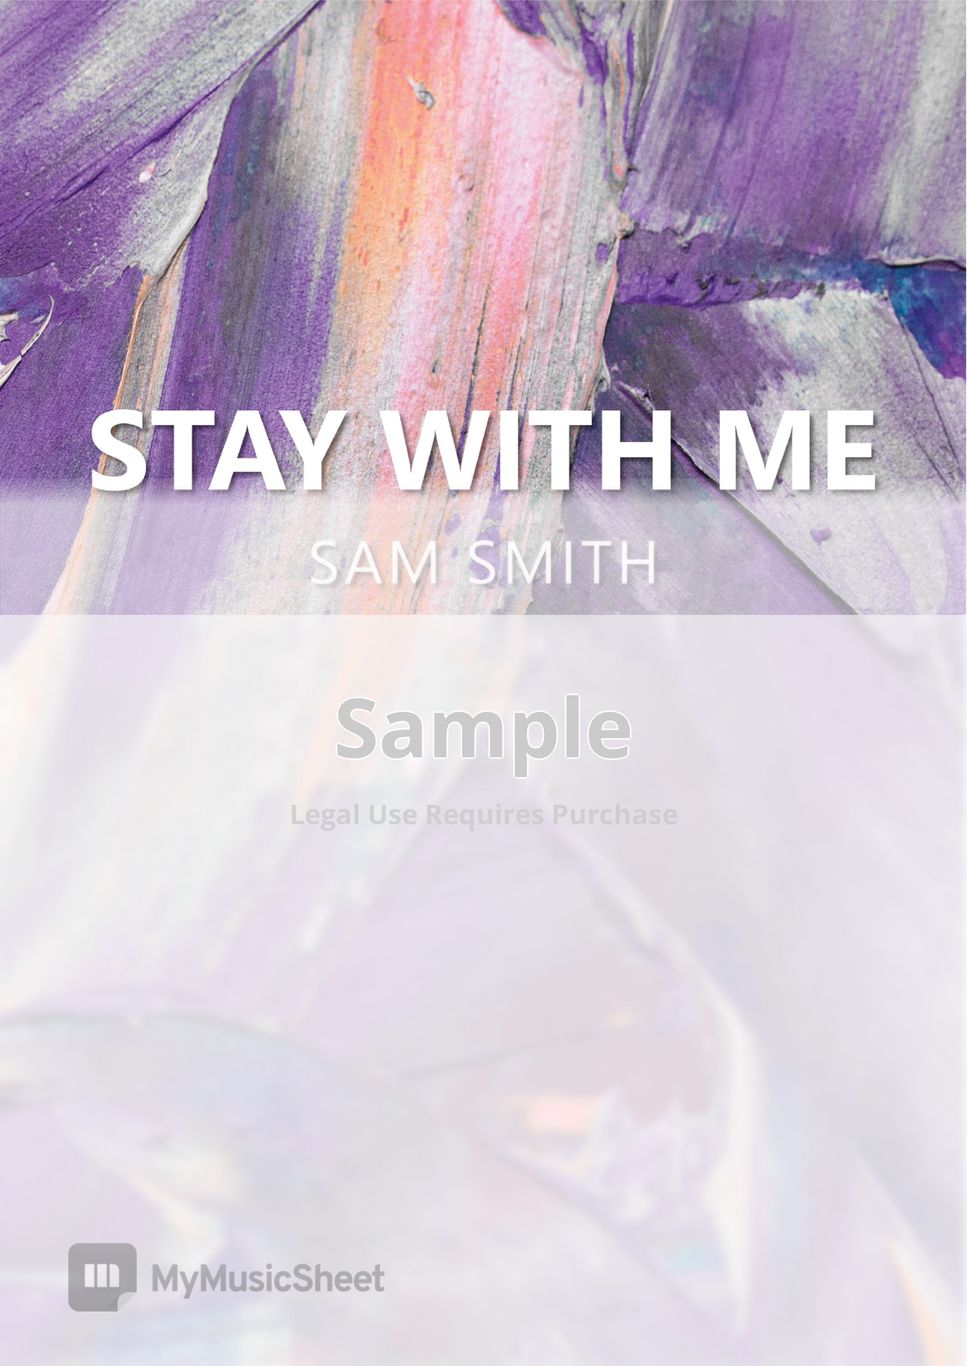 Stay With Me by Sam Smith